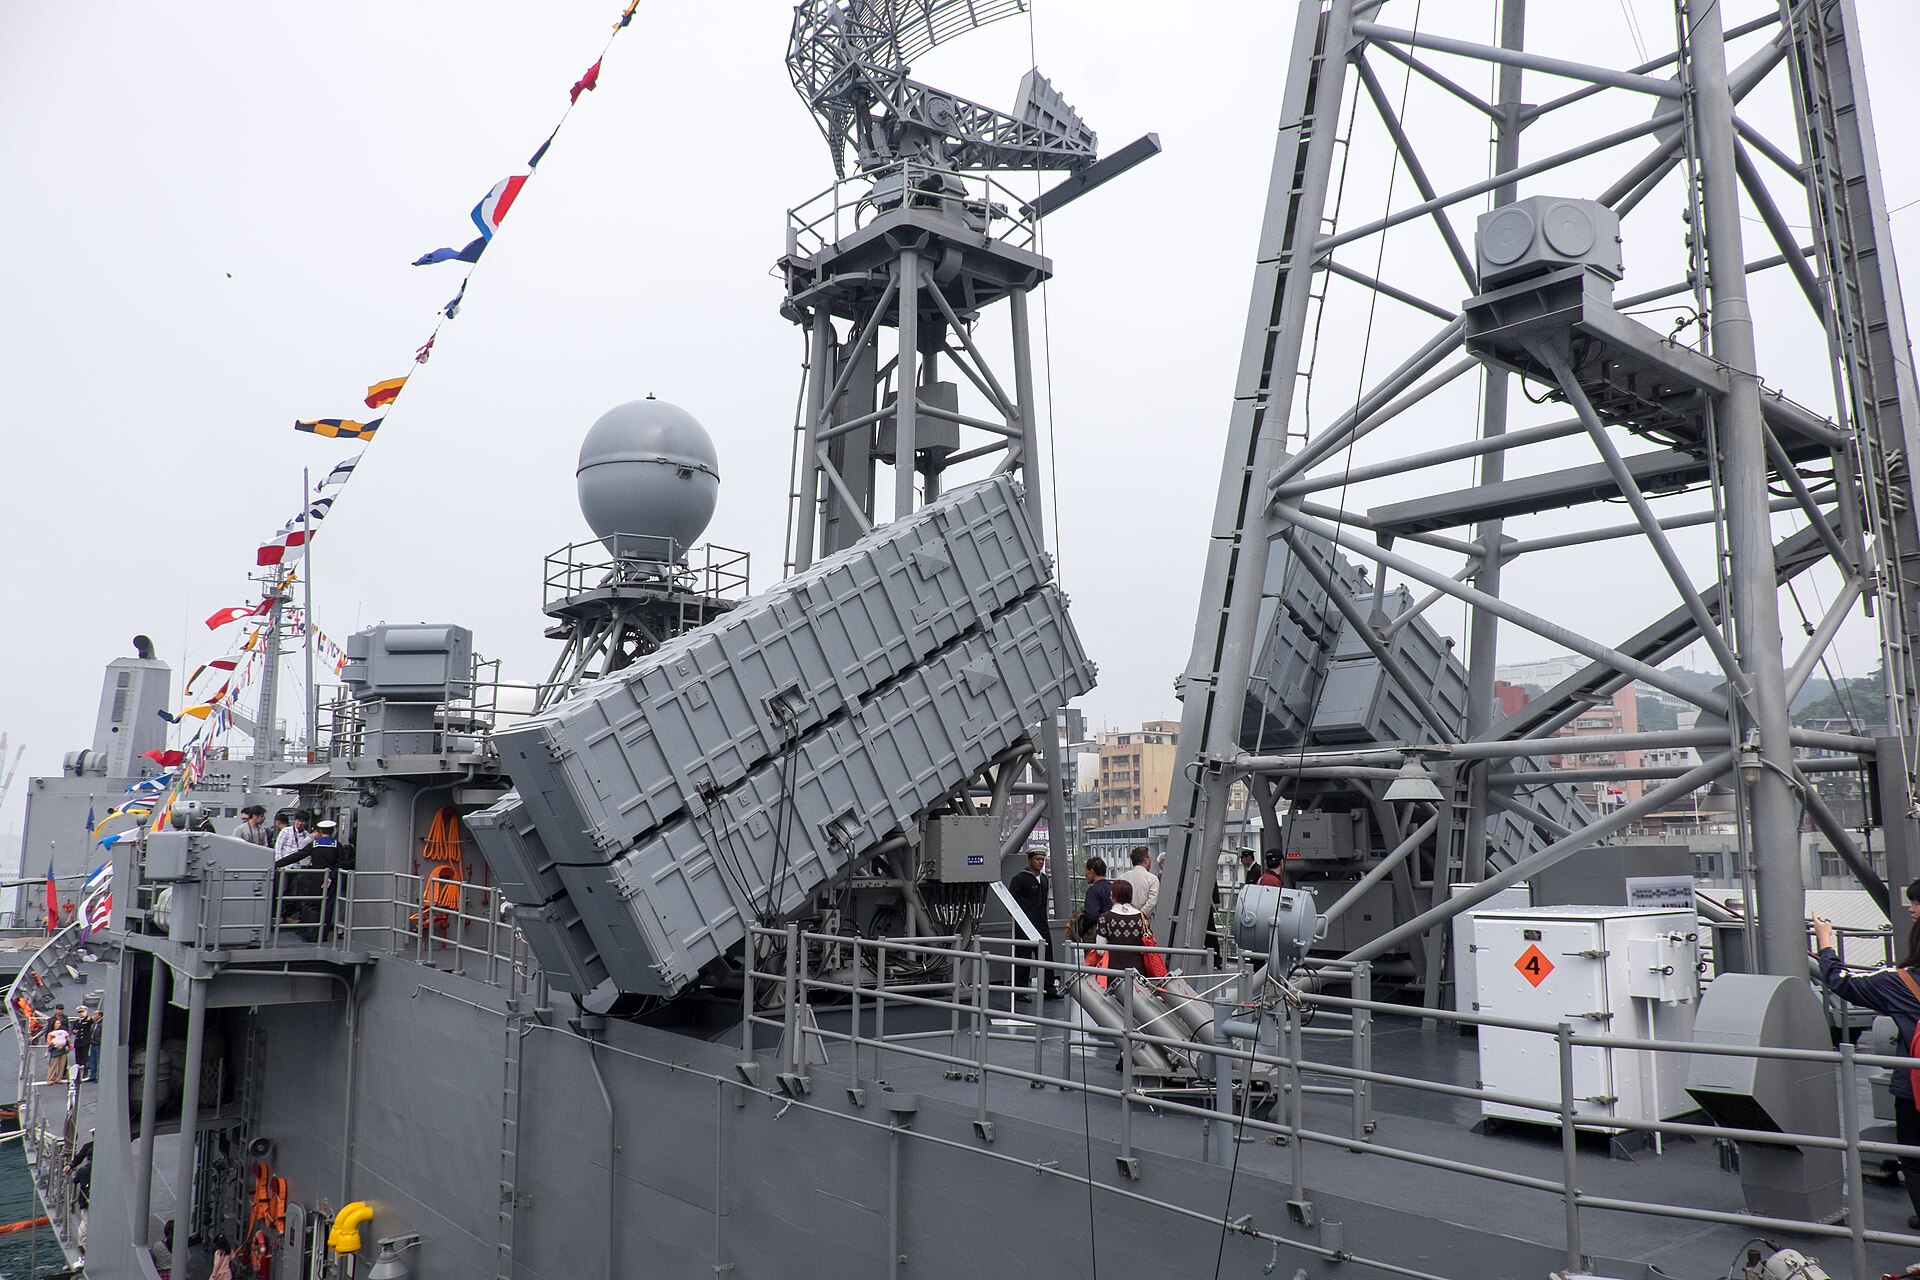 1920px-Hsiung_Feng_II_and_Hsiung_Feng_III_Anti-Ship_Missile_Launchers_aboard_on_Central_Upper_Deck_of_ROCN_Pan_Chao_%28PFG2-1108%29_20150316.jpg